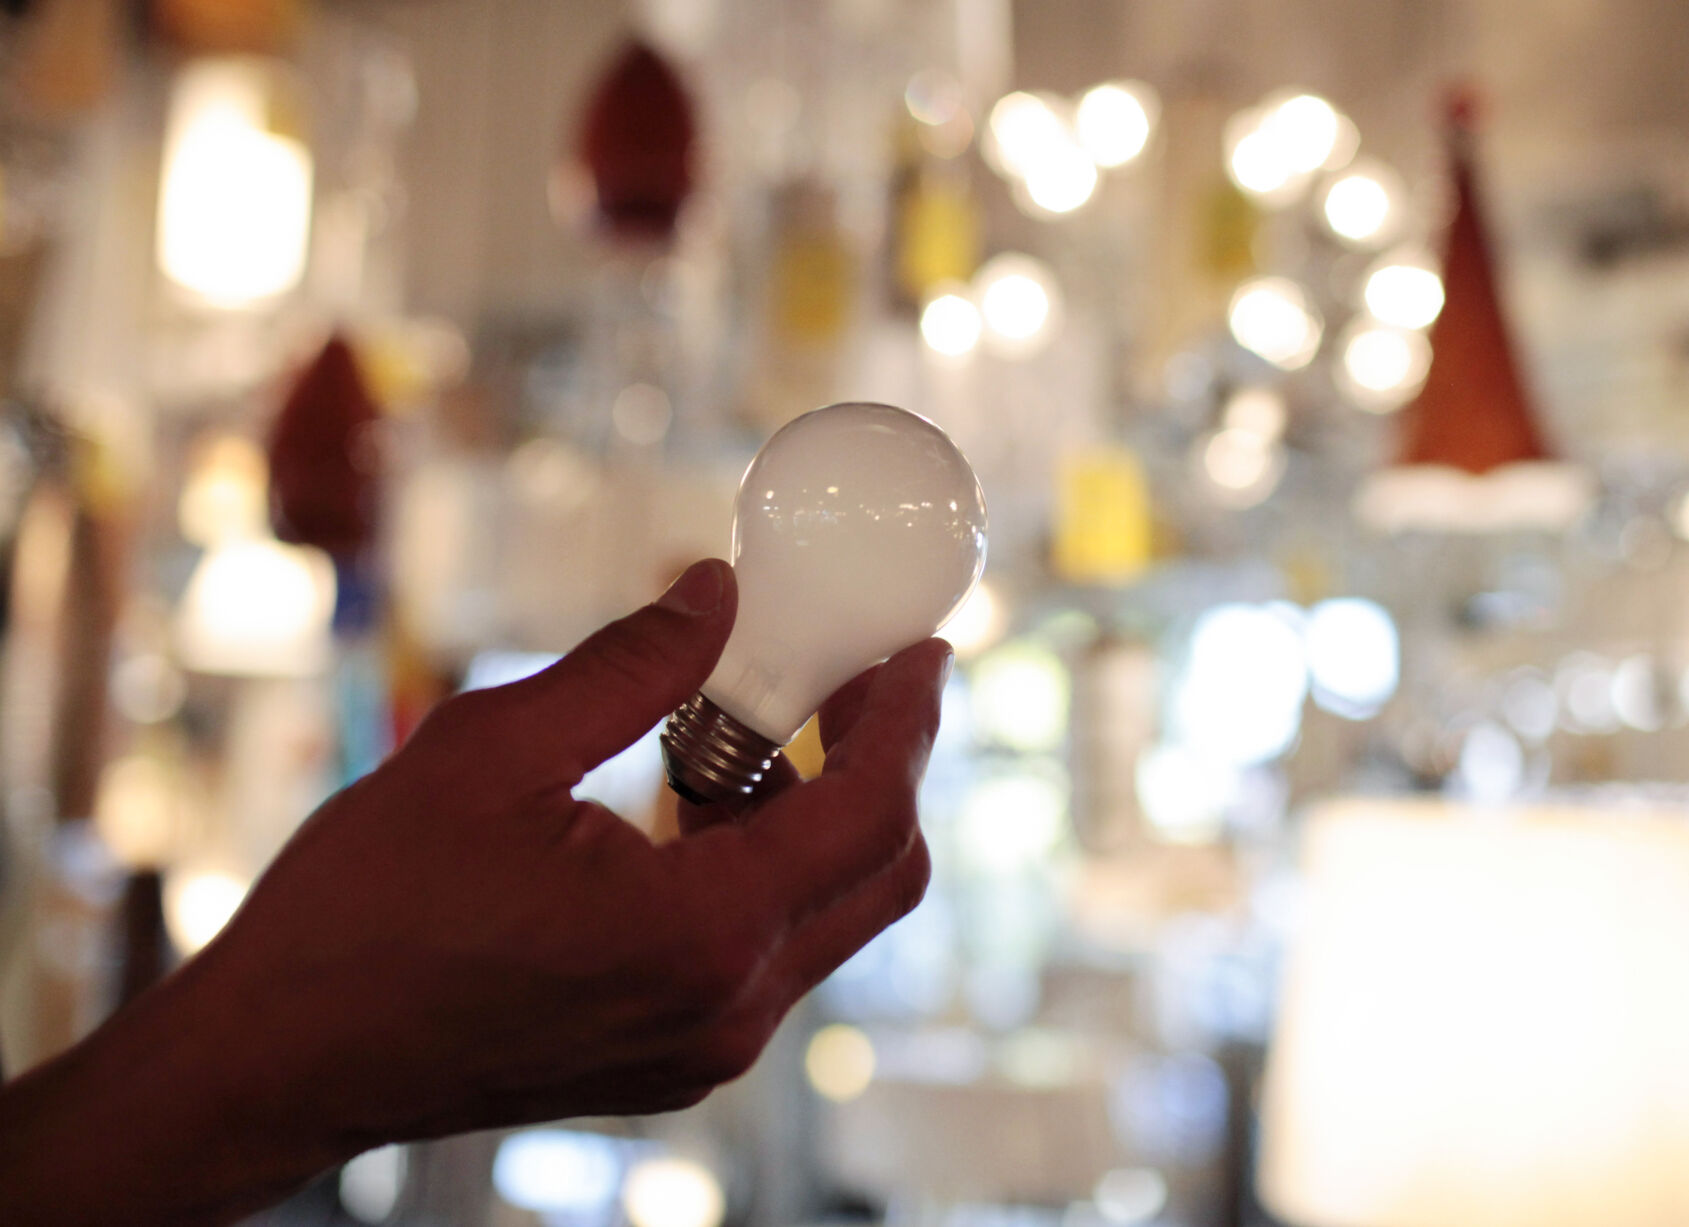 <p>FILE - Manager Nick Reynoza holds a 100-watt incandescent light bulb at Royal Lighting in Los Angeles, Jan. 21, 2011. New federal rules governing the energy efficiency of lighting systems went into full effect Tuesday, effectively ending the sale and manufacture of bulbs that trace their origin to an 1880 Thomas Edison patent. (AP Photo/Jae C. Hong, File)</p>   PHOTO CREDIT: Jae C. Hong